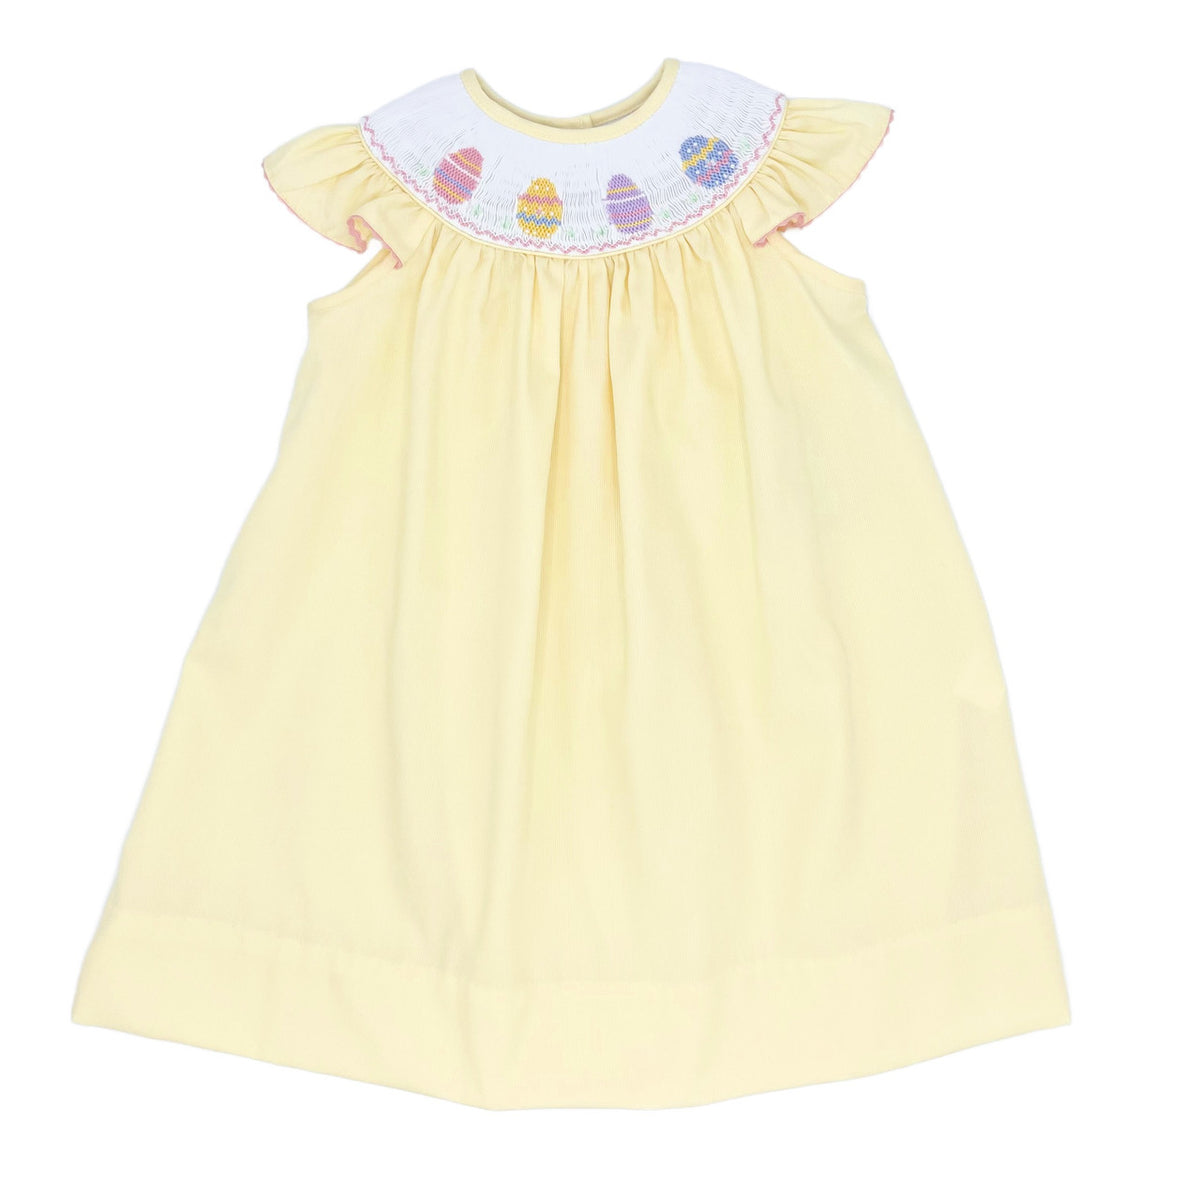 Yellow Easter Egg Dress | Monday's Child